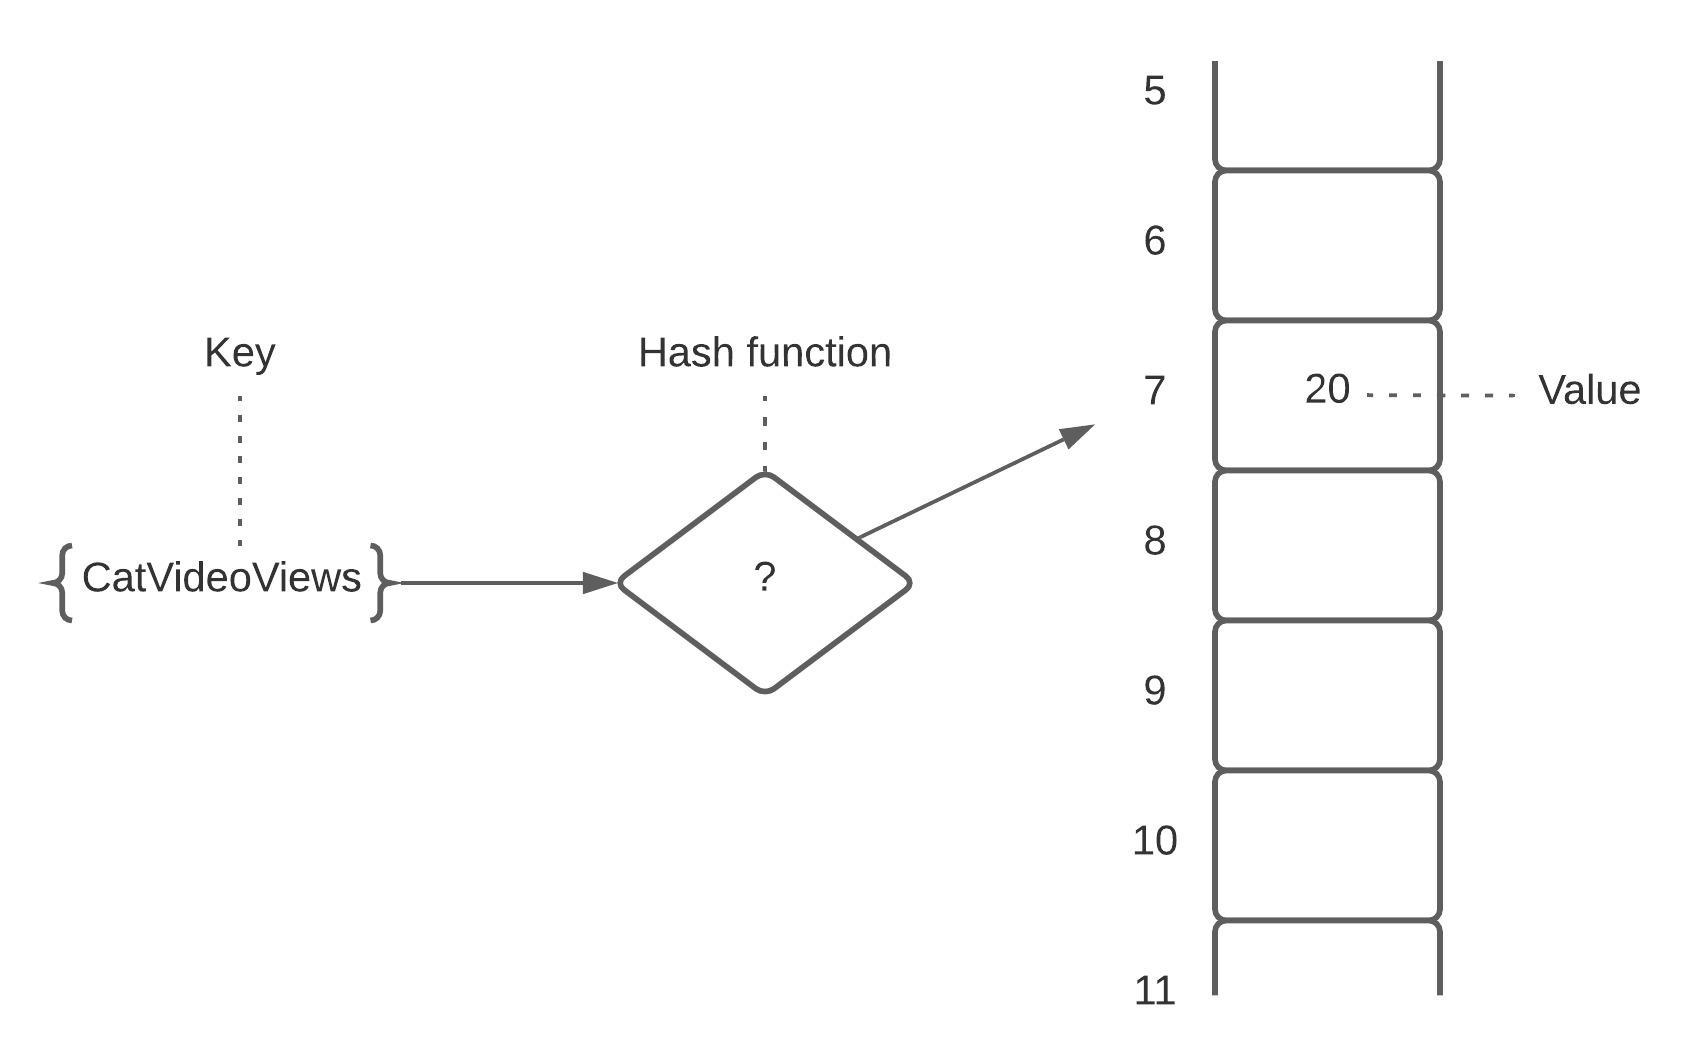 Hash function converts given key into a numeric index